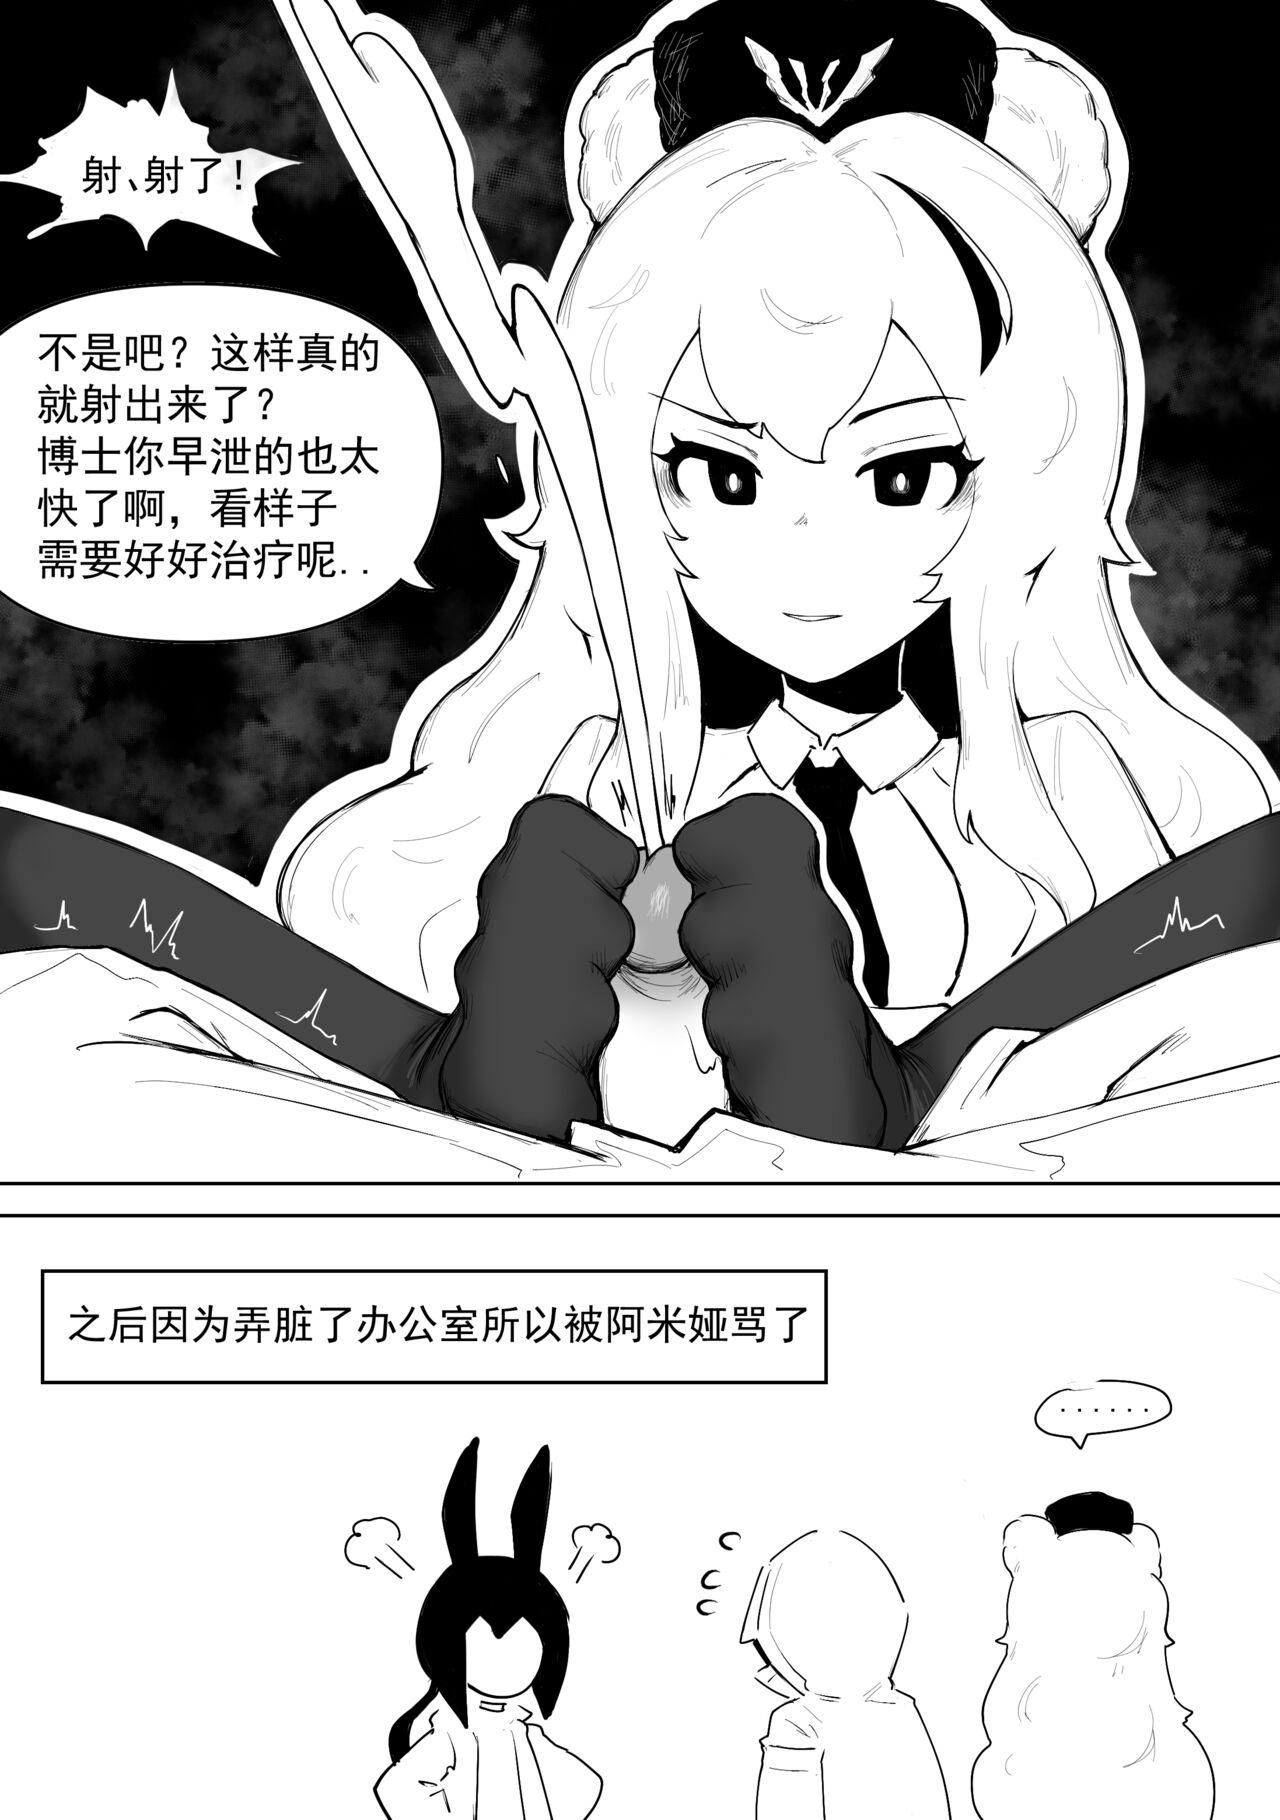 Casting 澄澈之冰 早露 - Arknights Amateur Sex - Page 6